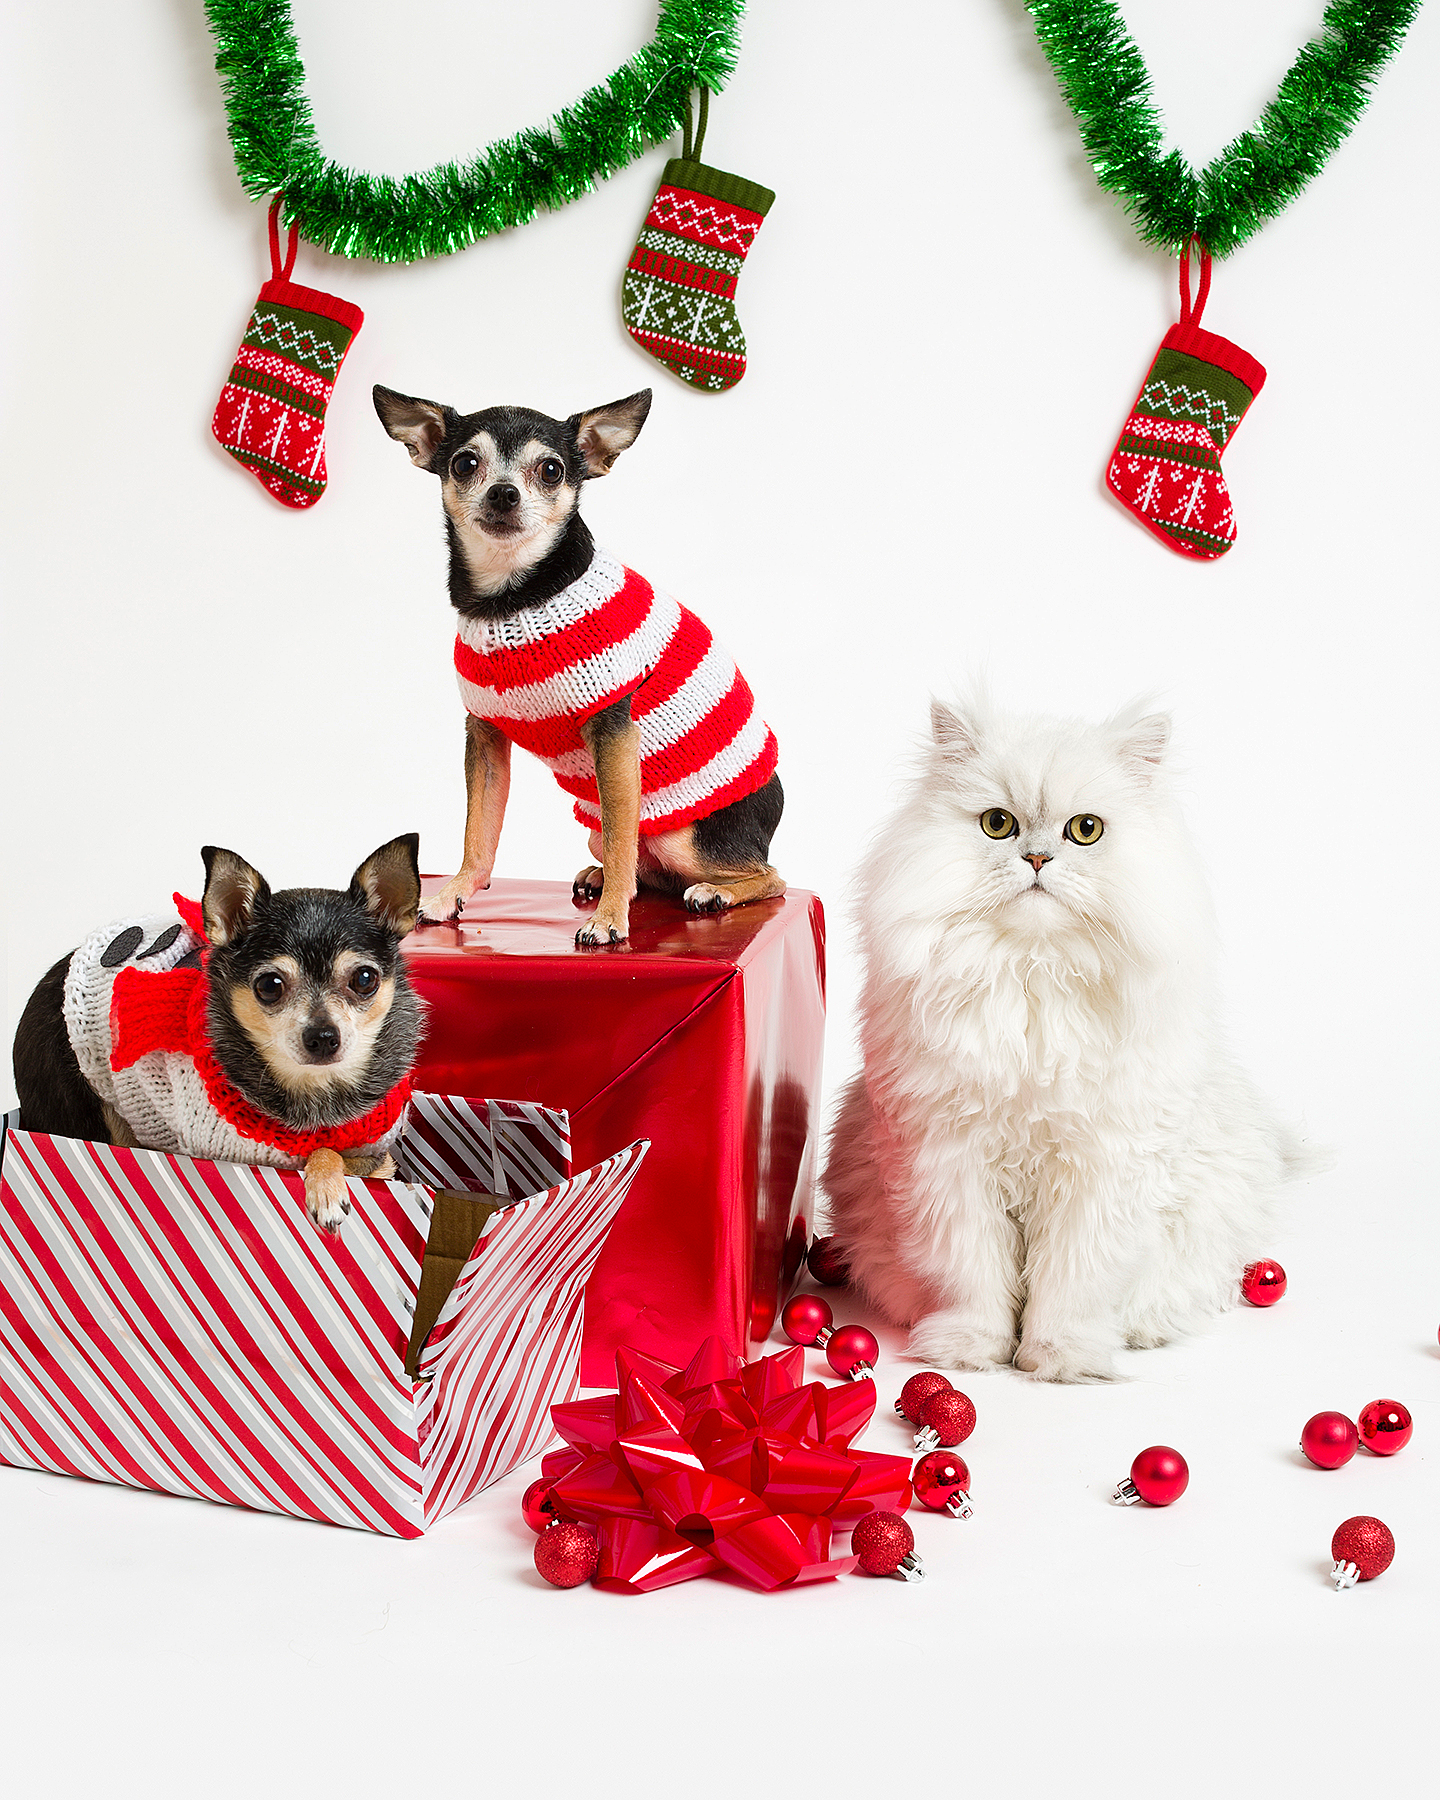 The best gifts for your dog or cat.